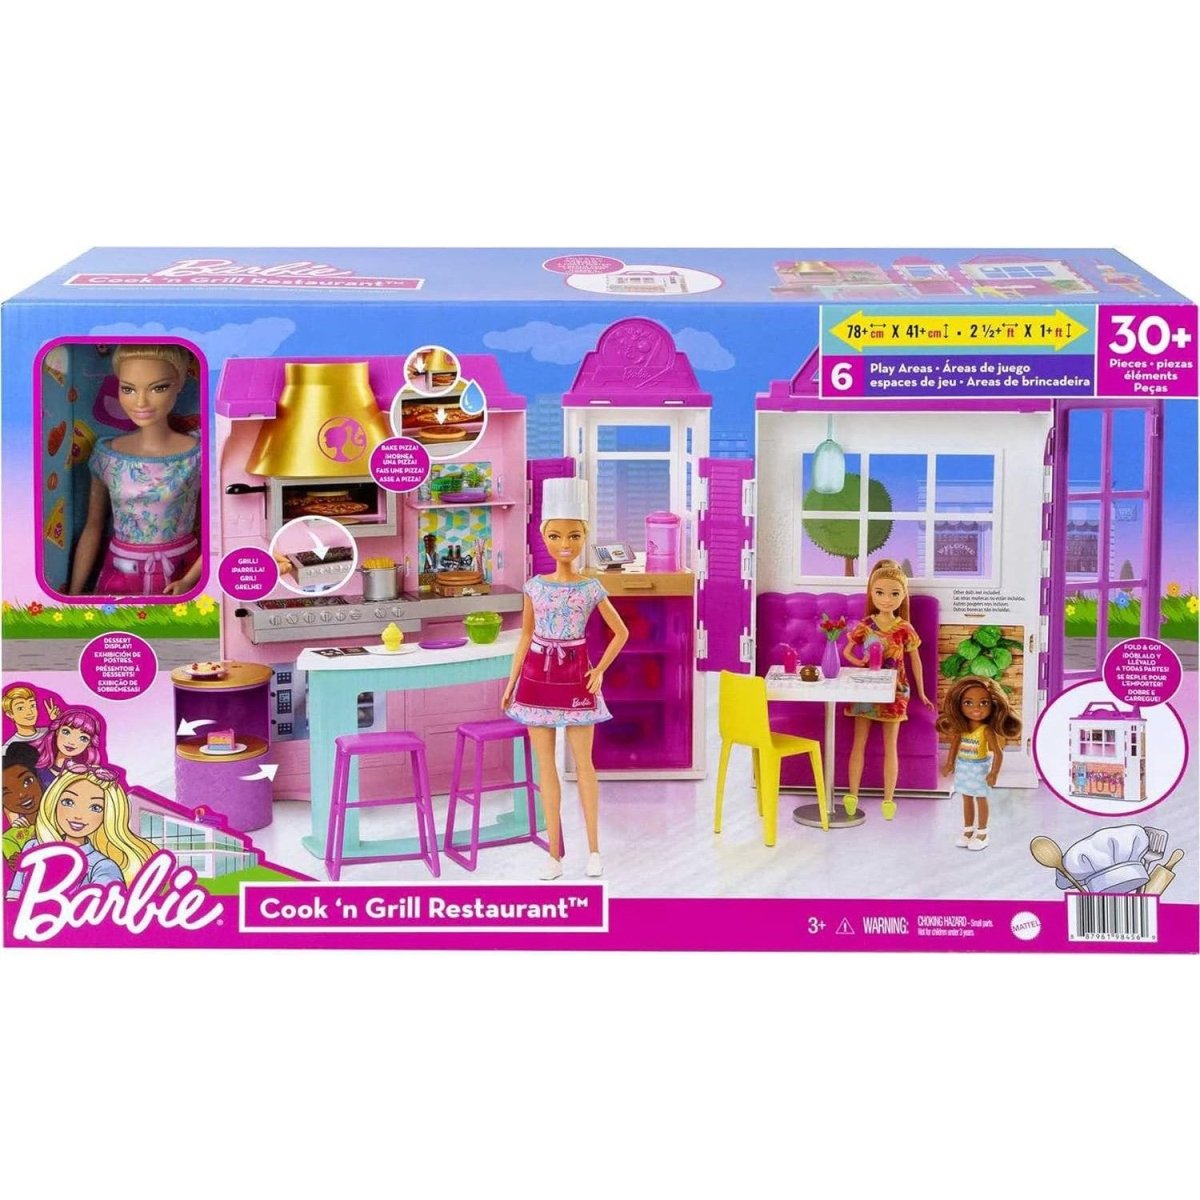 Barbie Cook 'n Grill Restaurant Playset with Doll – McGreevy's Toys Direct